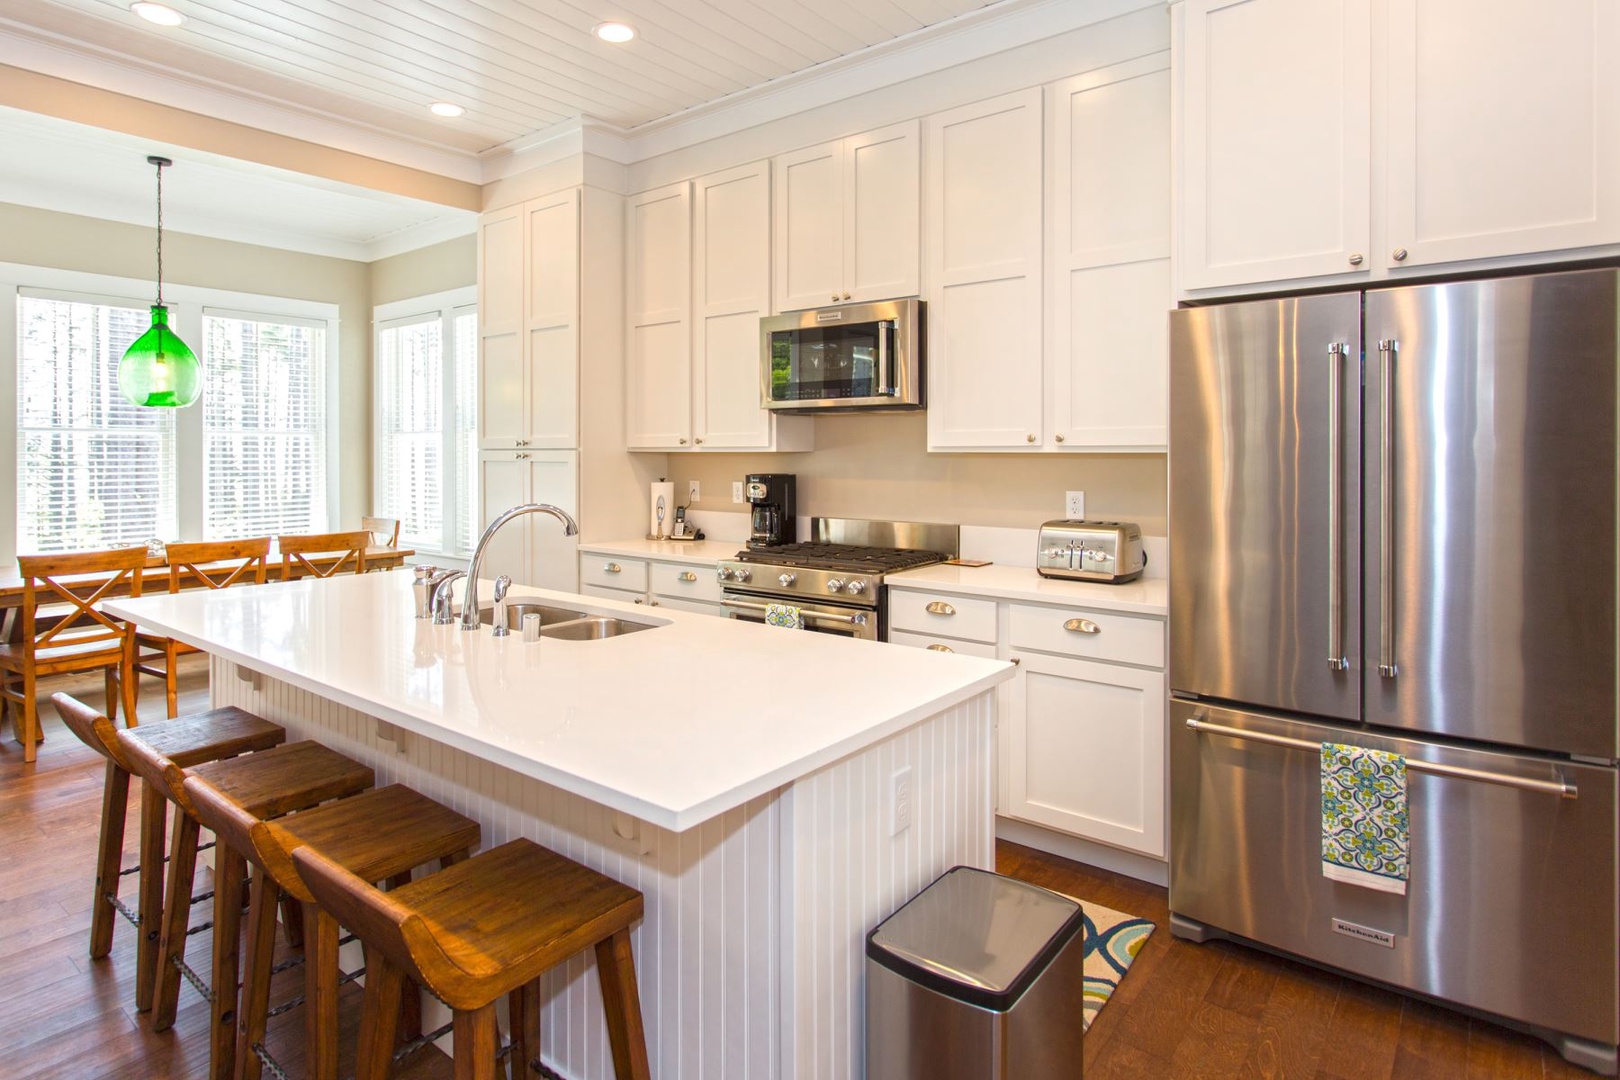 Full kitchen with stainless steel appliances